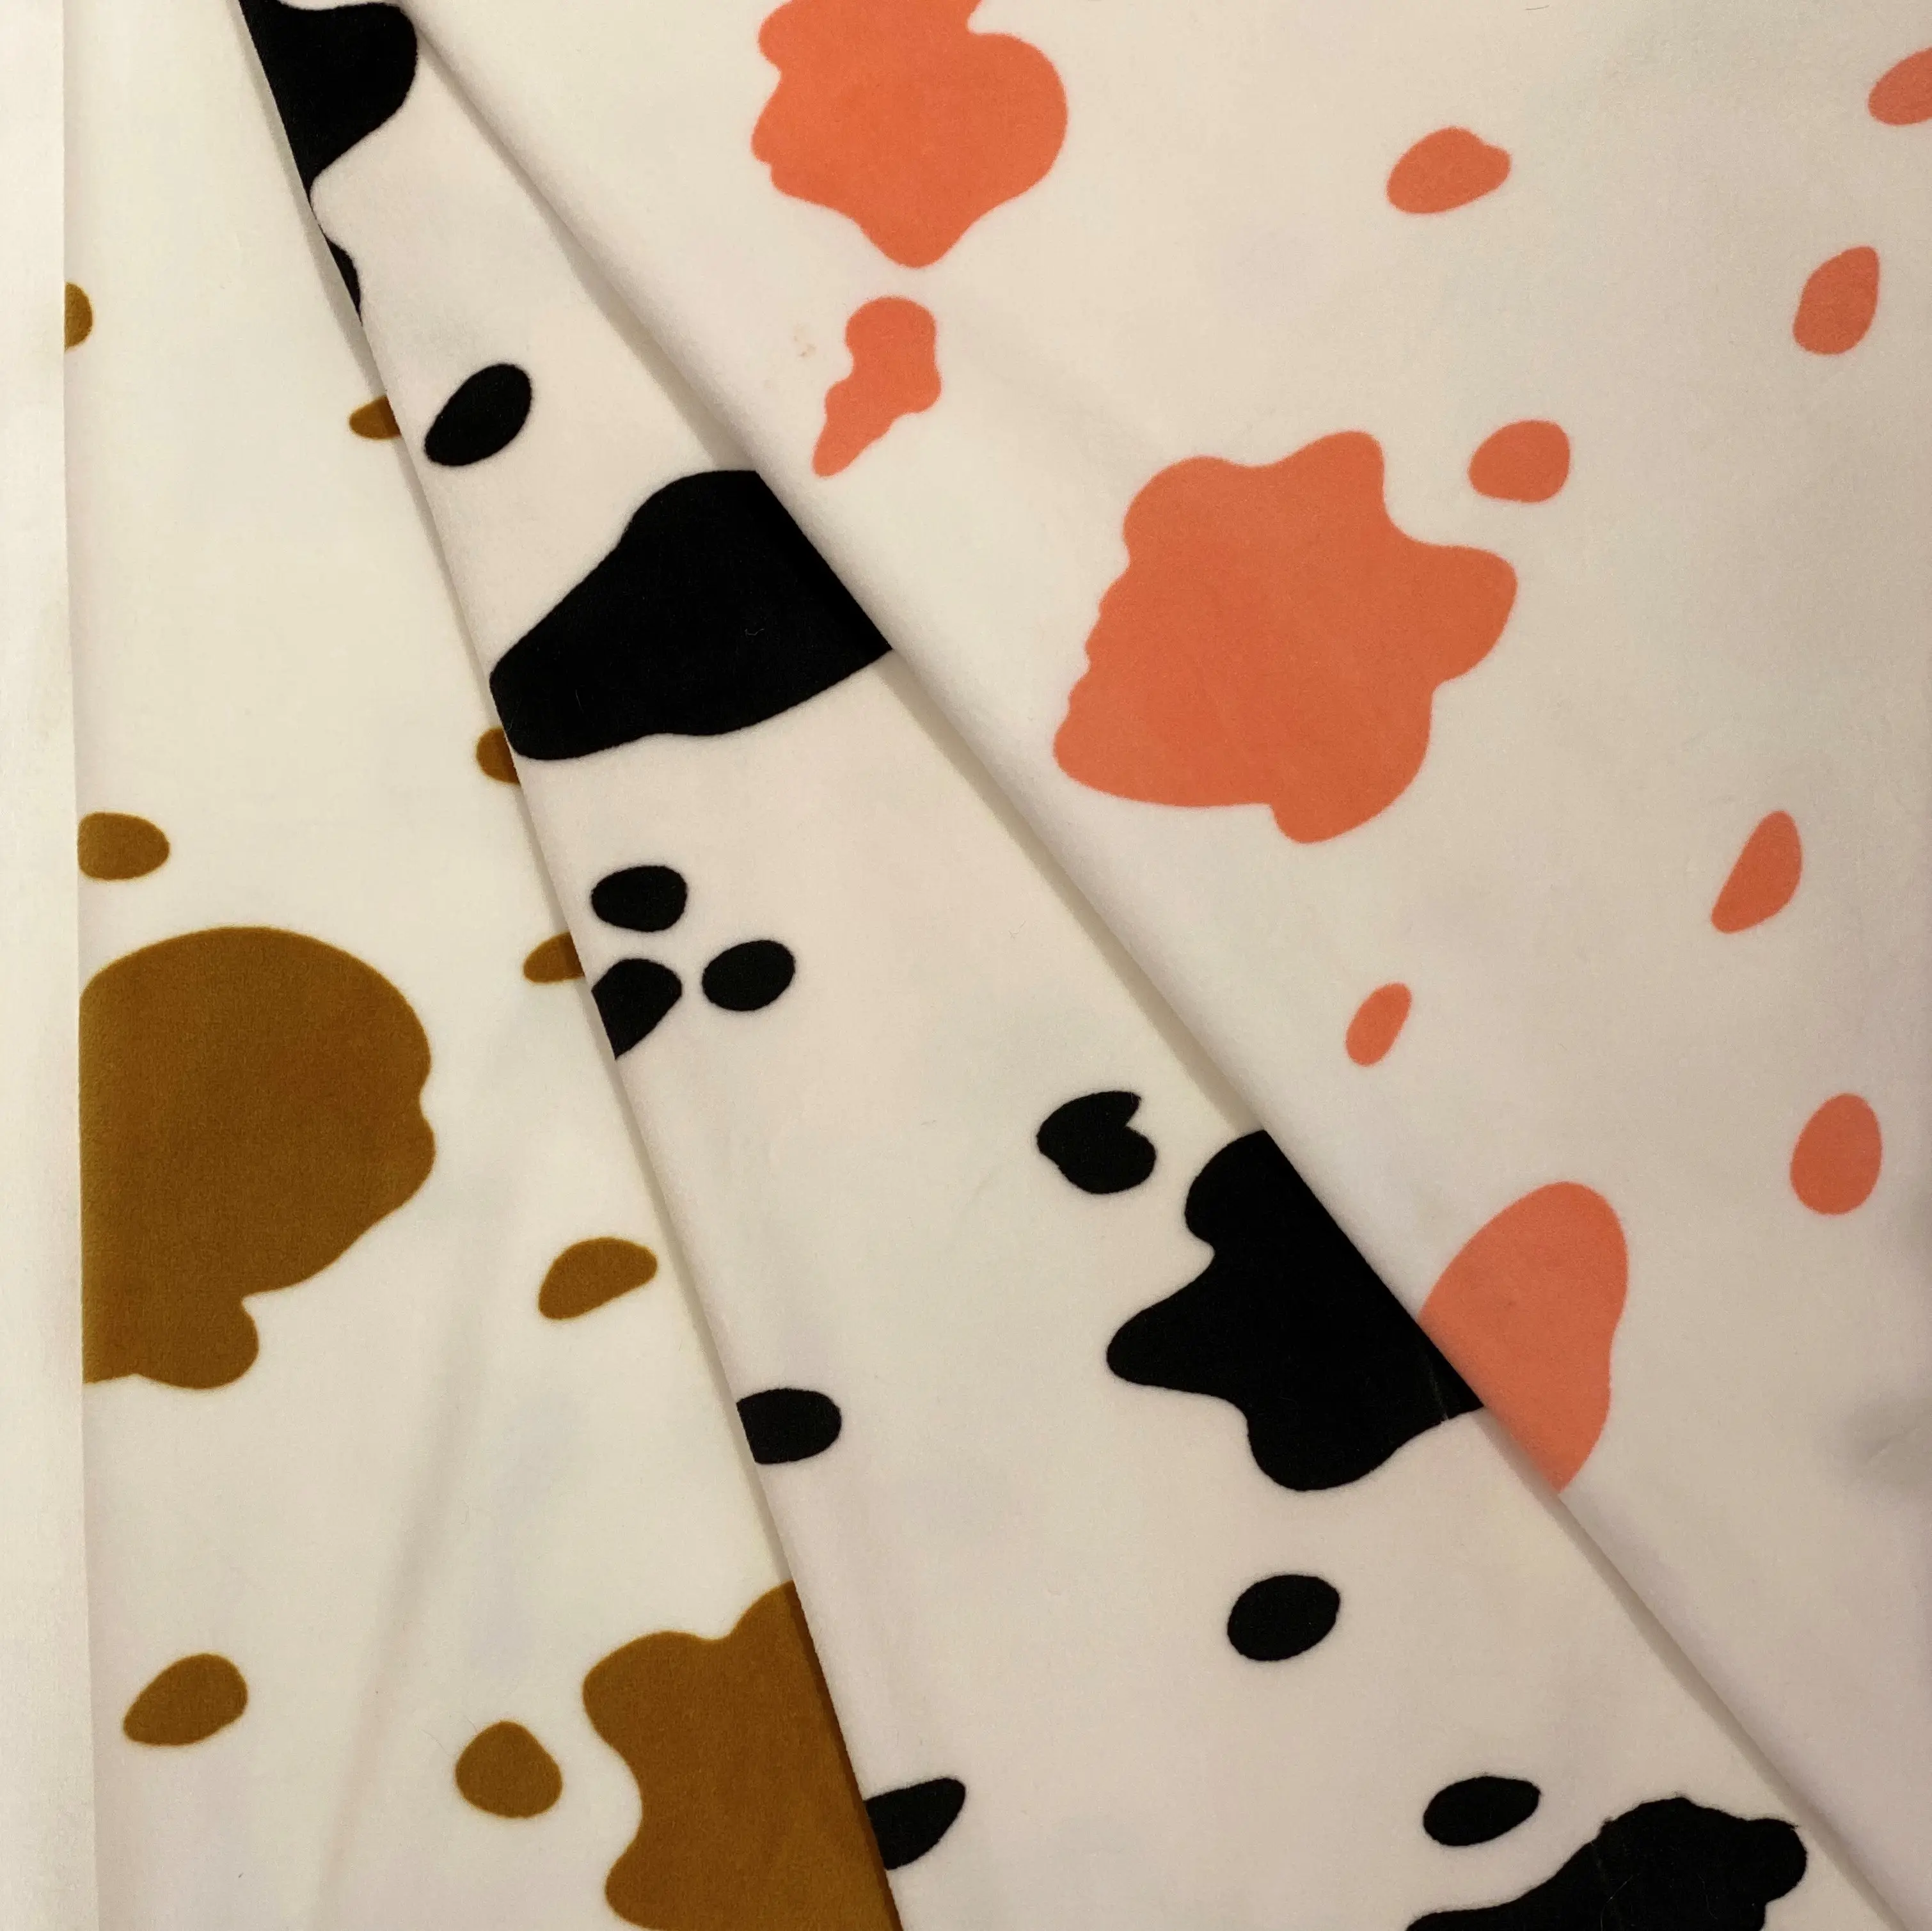 95% Polyester 5% Spandex Printed Fabric 4 Way Stretch Fabric Cow Pattern For Toys Home Textiles